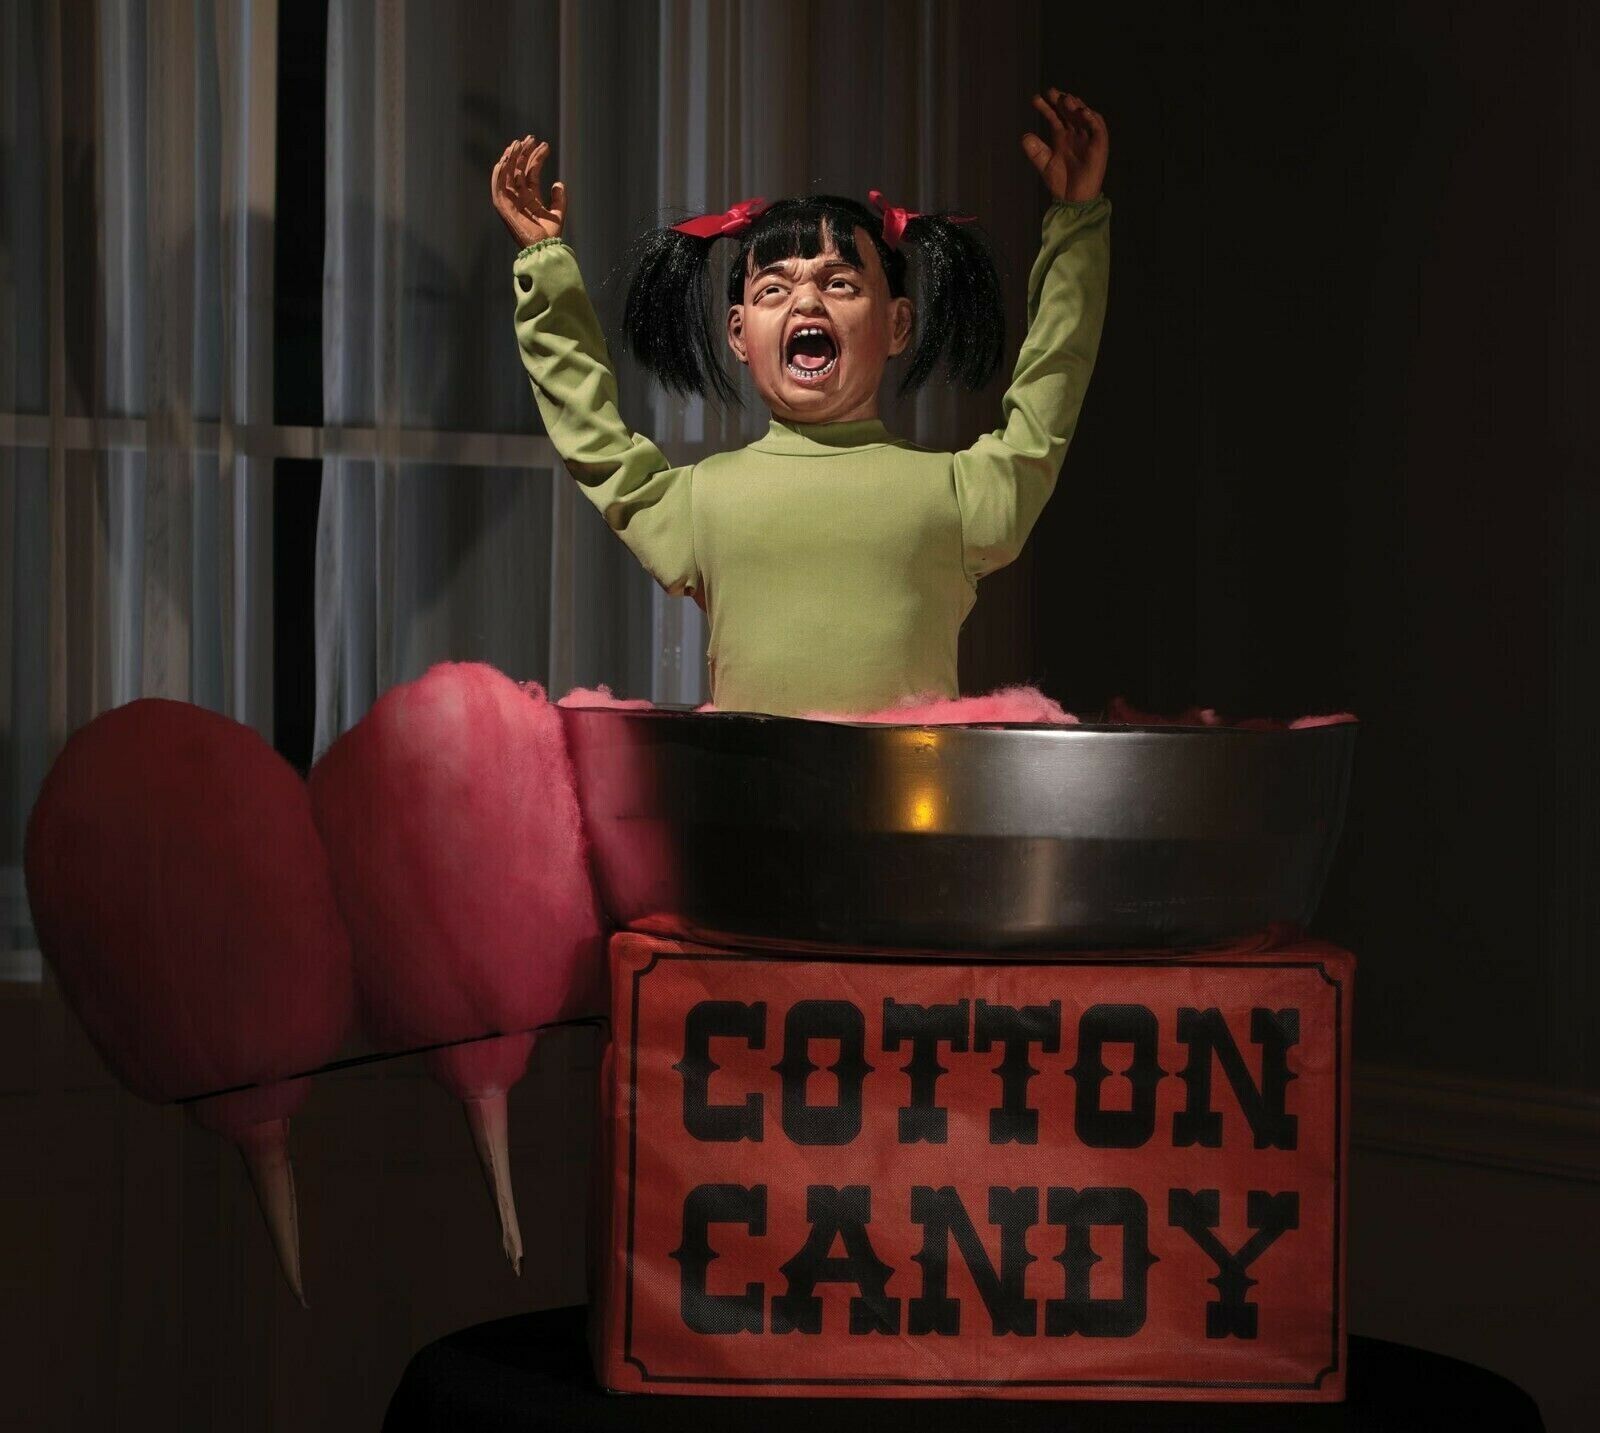 Halloween Animated COTTON CANDICE Crying Carnival Haunted House Decoration Prop